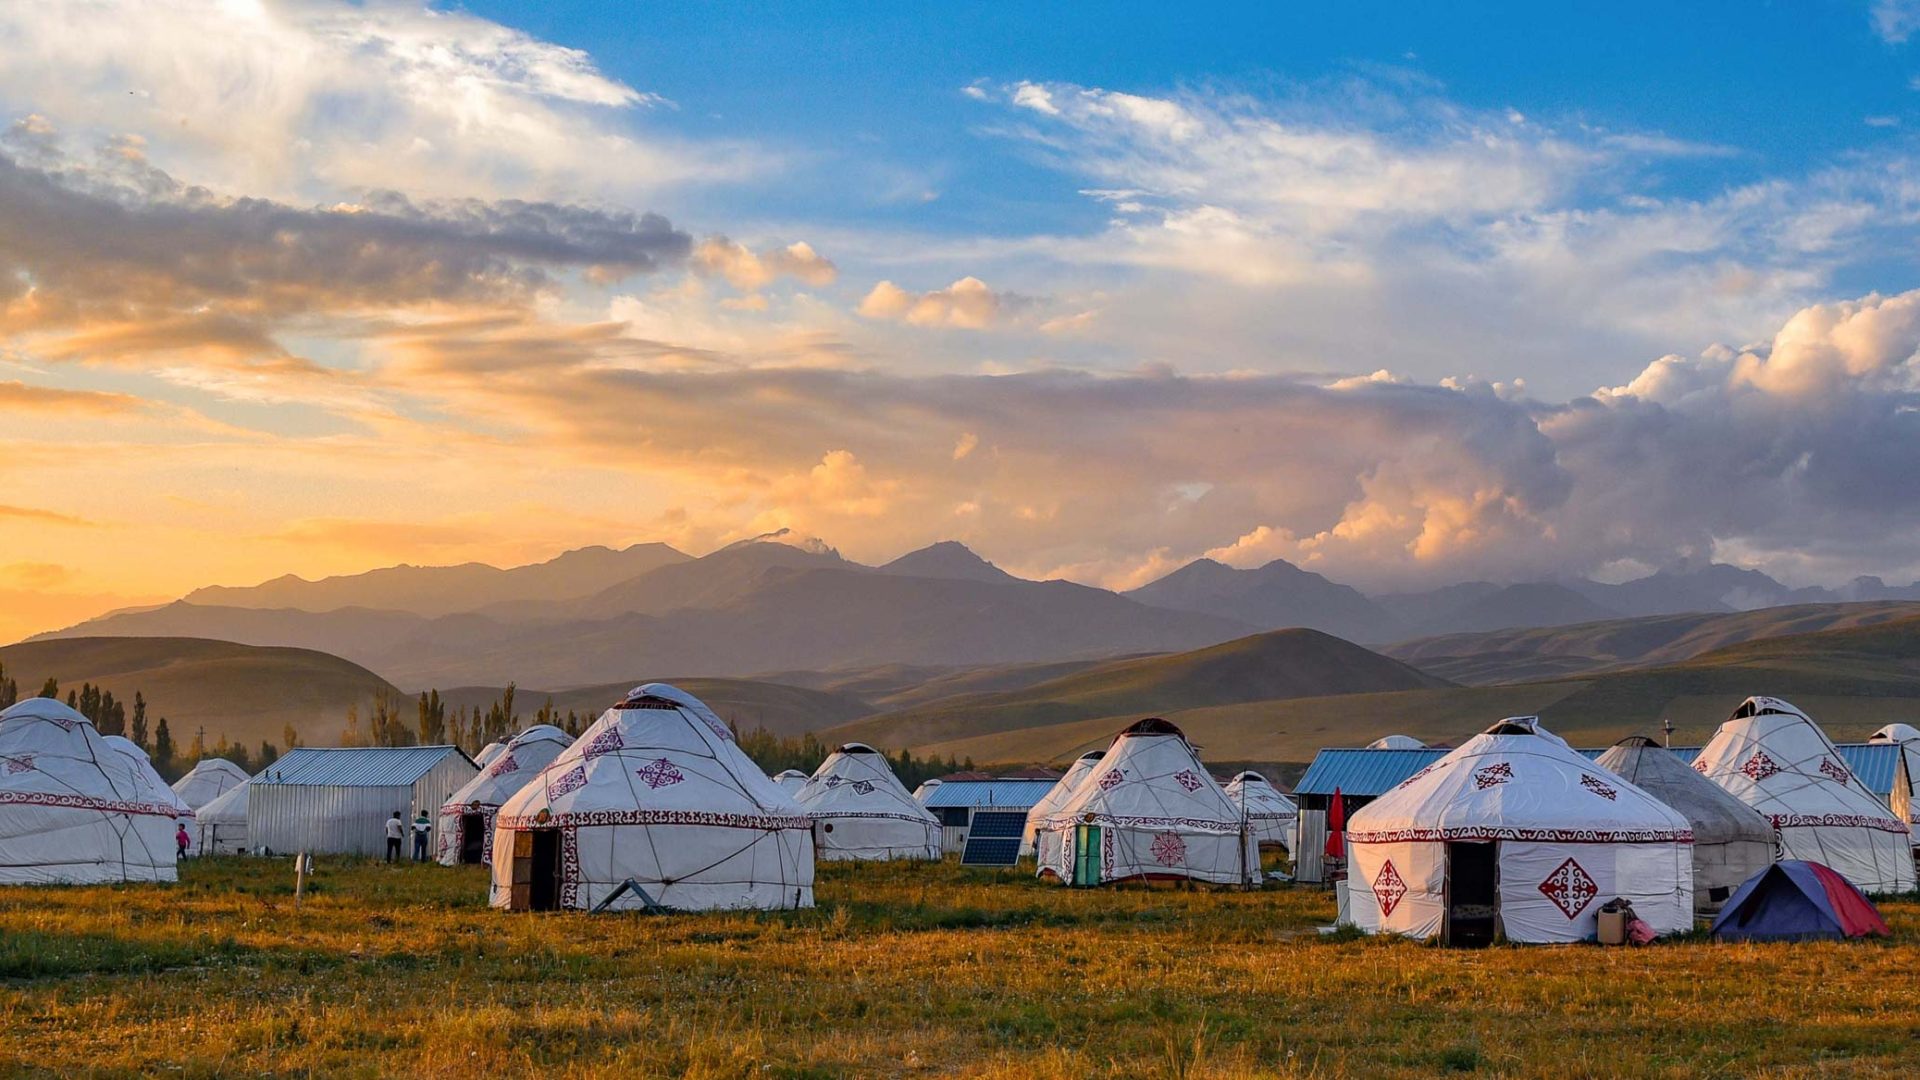 Full circle: Why the ancient yurt is suited for tomorrow